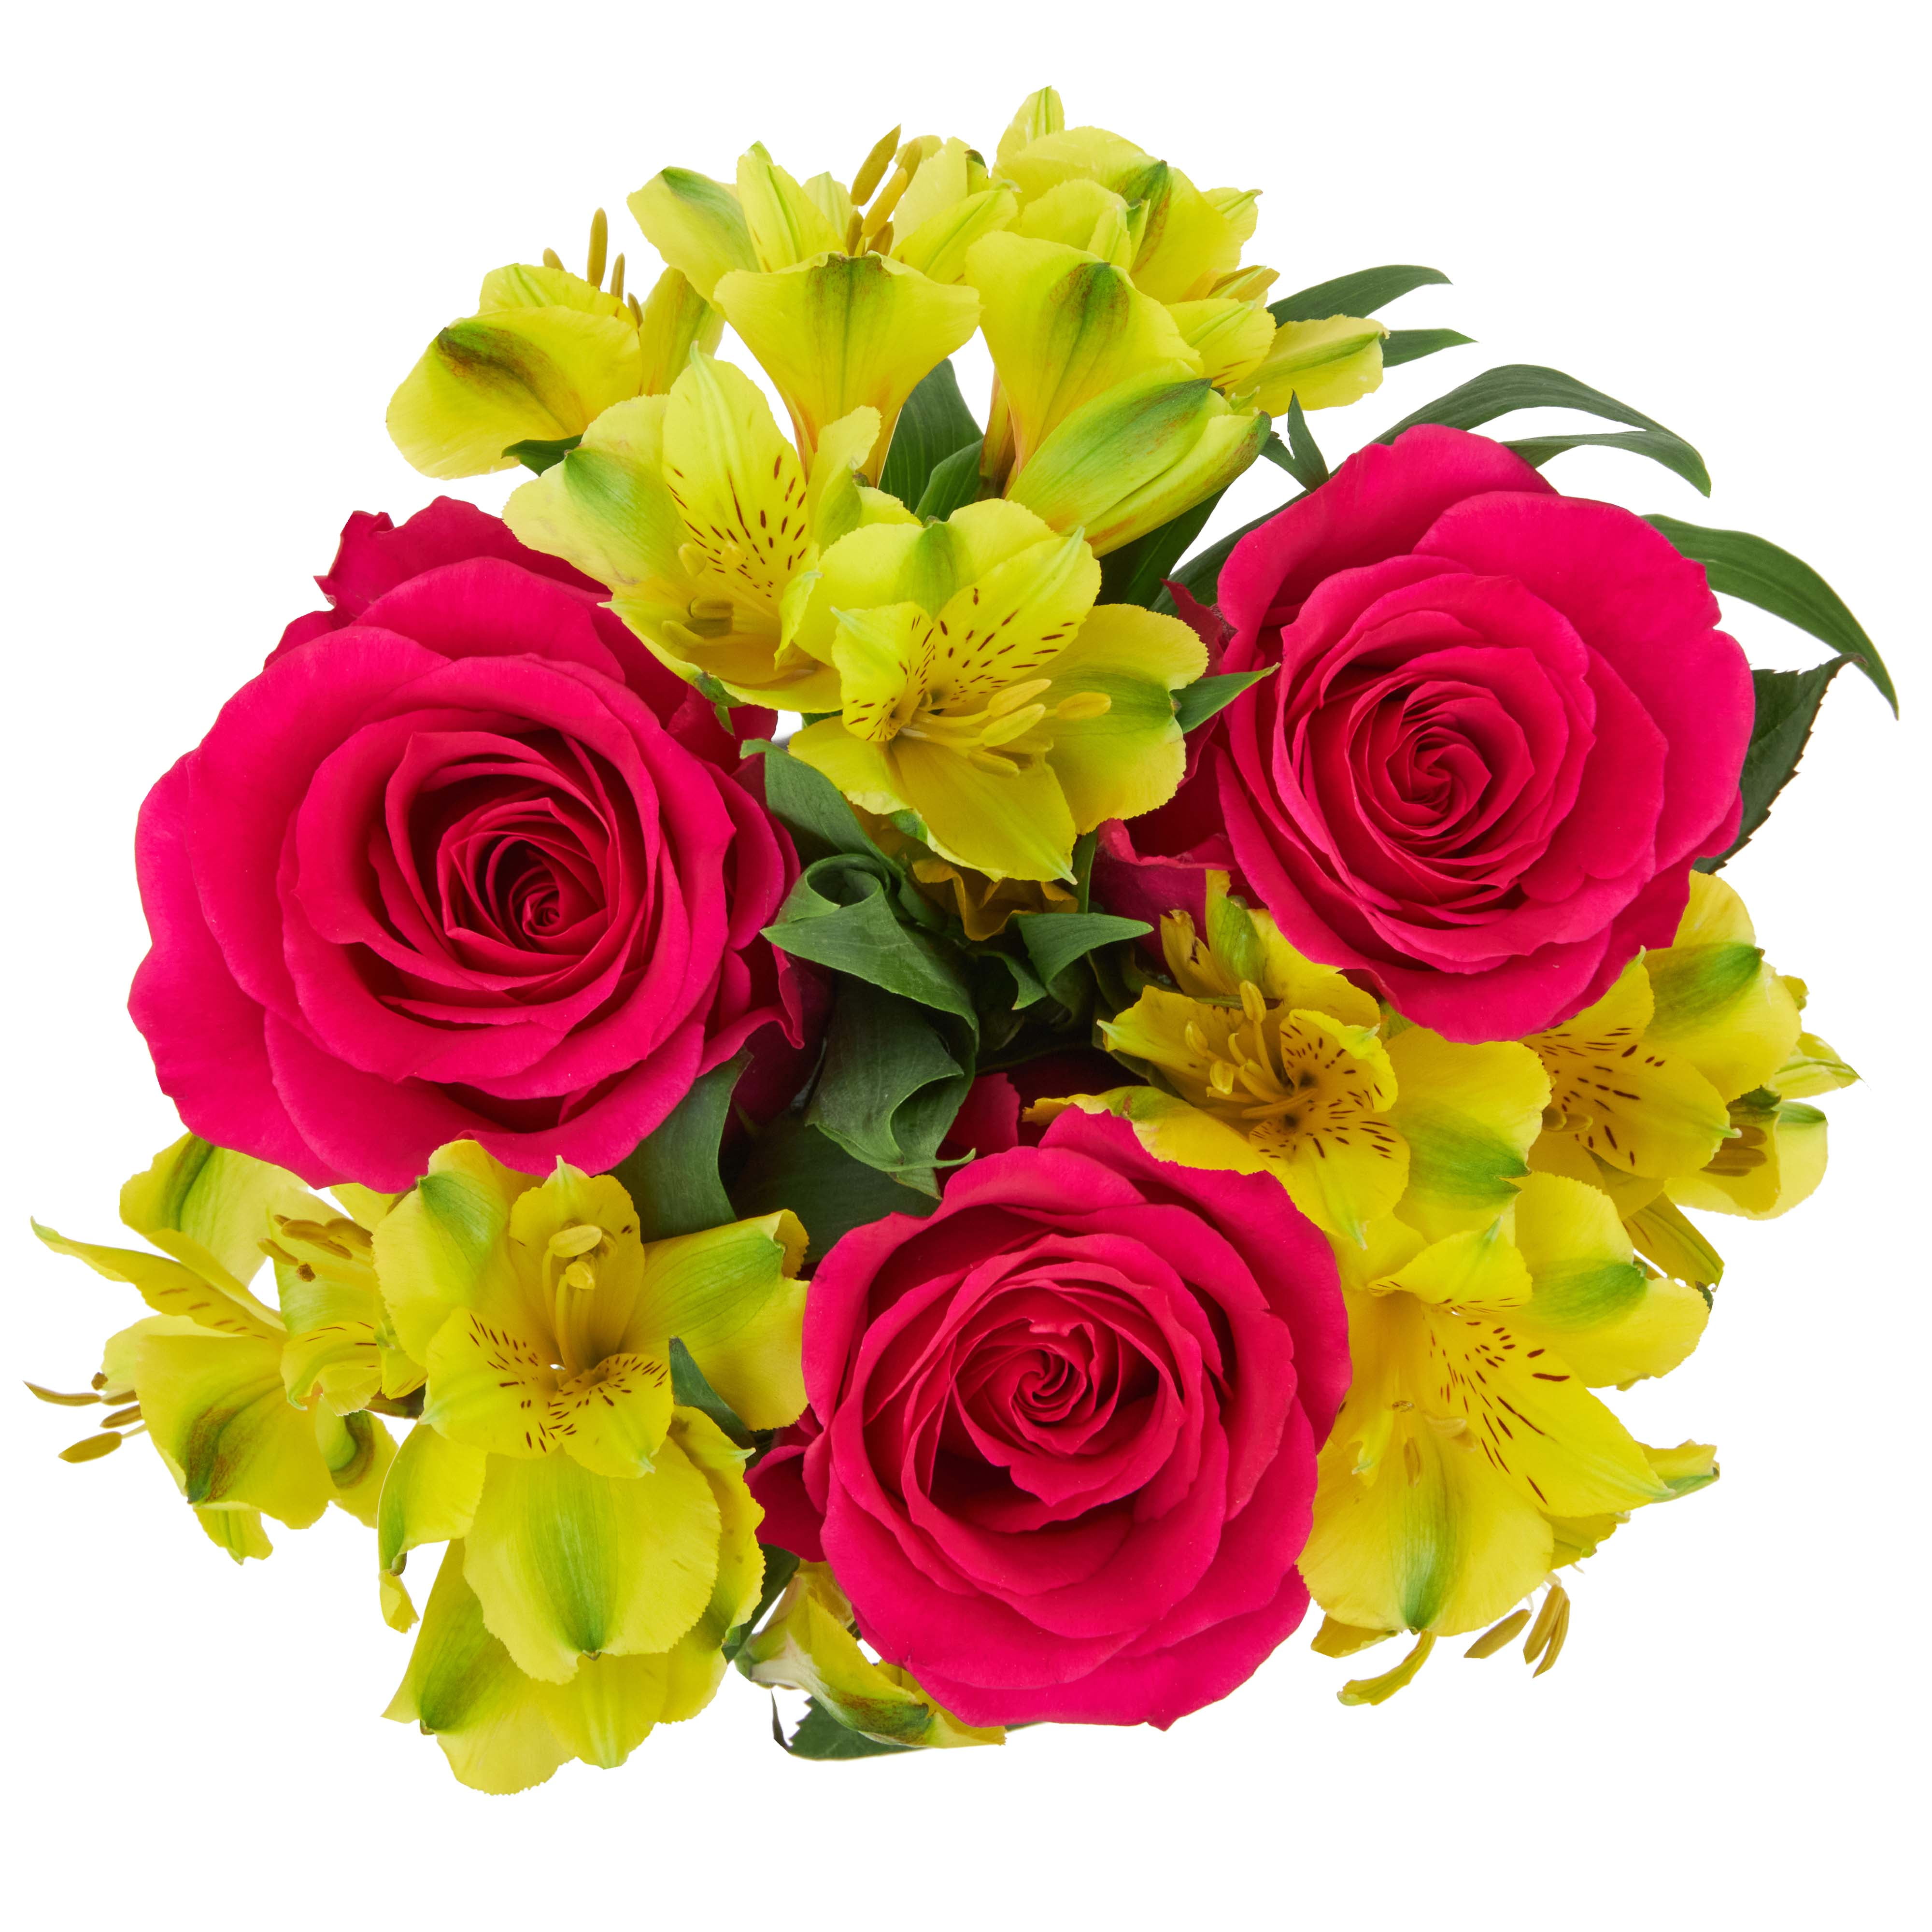 Fresh-Cut Rose and Flower Mini Bouquet, Minimum of 6 Stems, Colors Vary